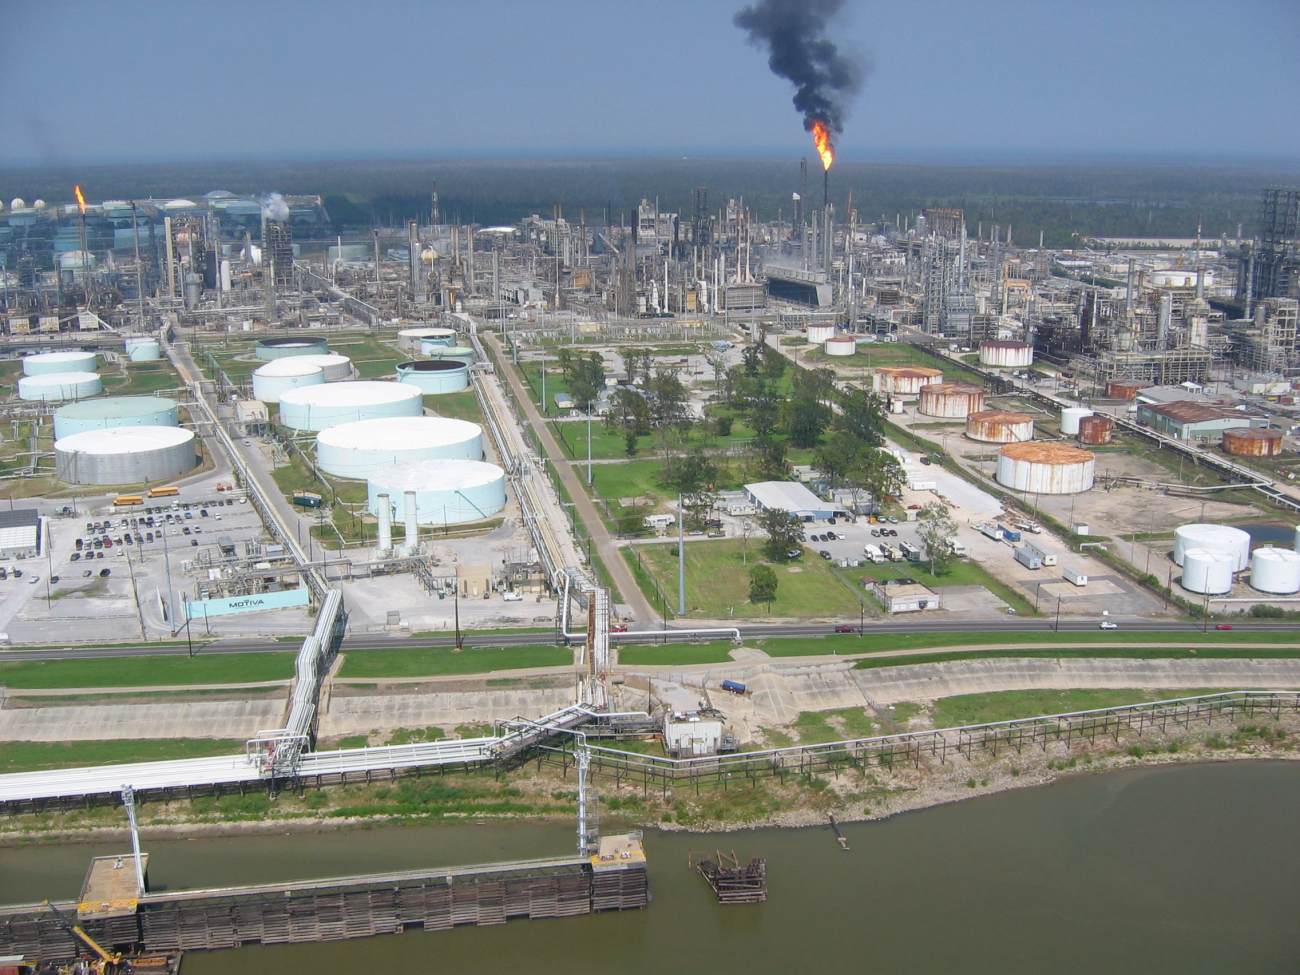 Motiva refinery west of New Orleans